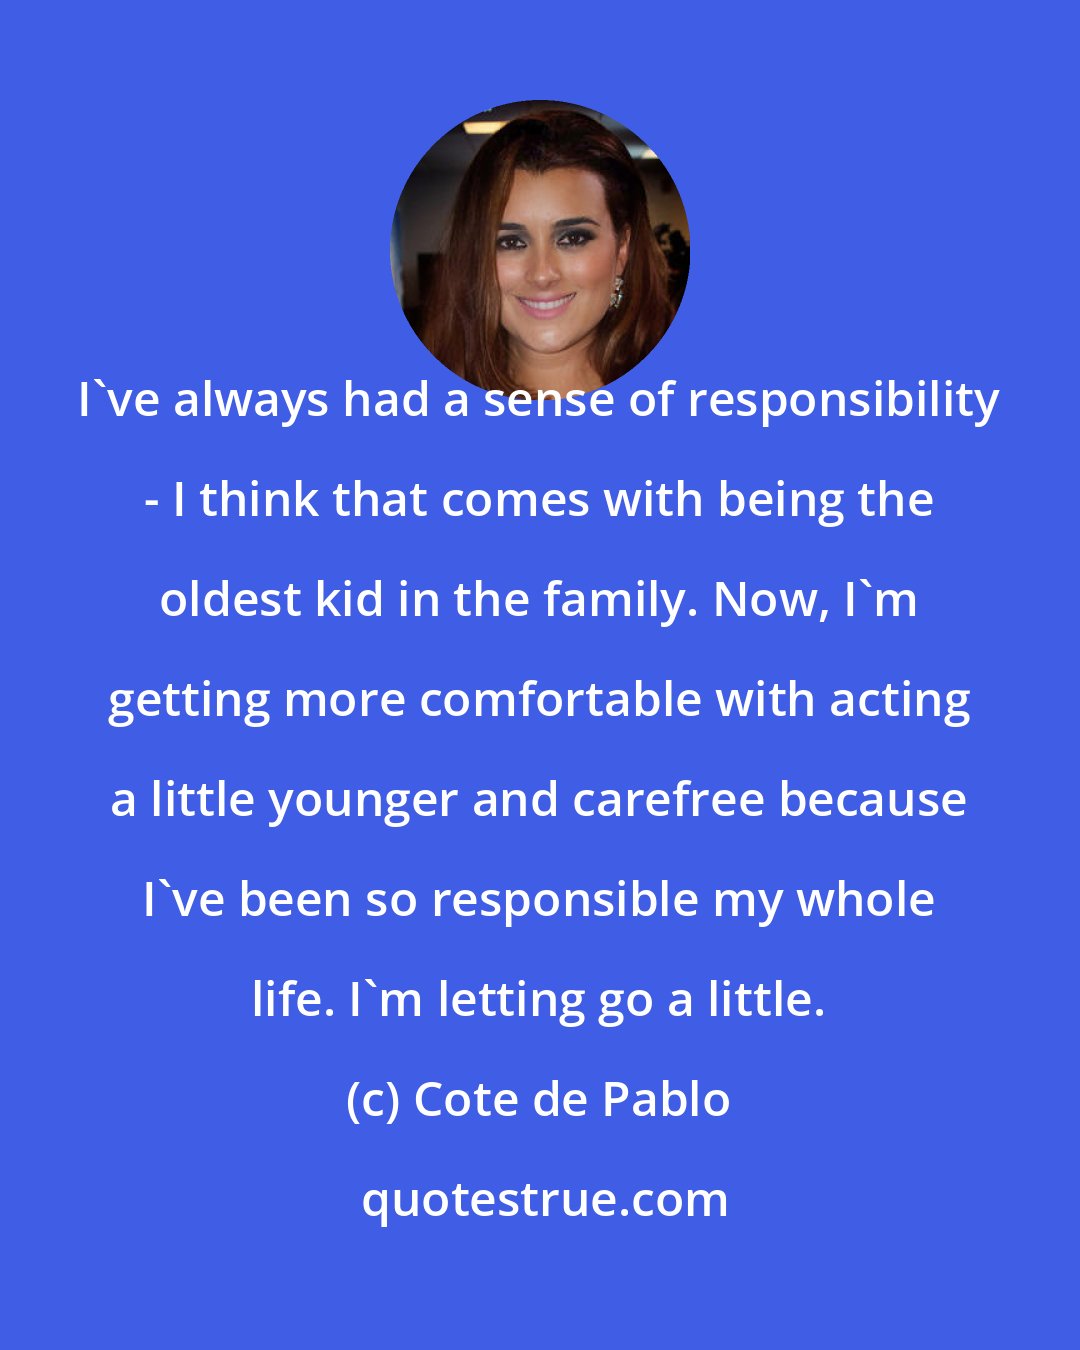 Cote de Pablo: I've always had a sense of responsibility - I think that comes with being the oldest kid in the family. Now, I'm getting more comfortable with acting a little younger and carefree because I've been so responsible my whole life. I'm letting go a little.